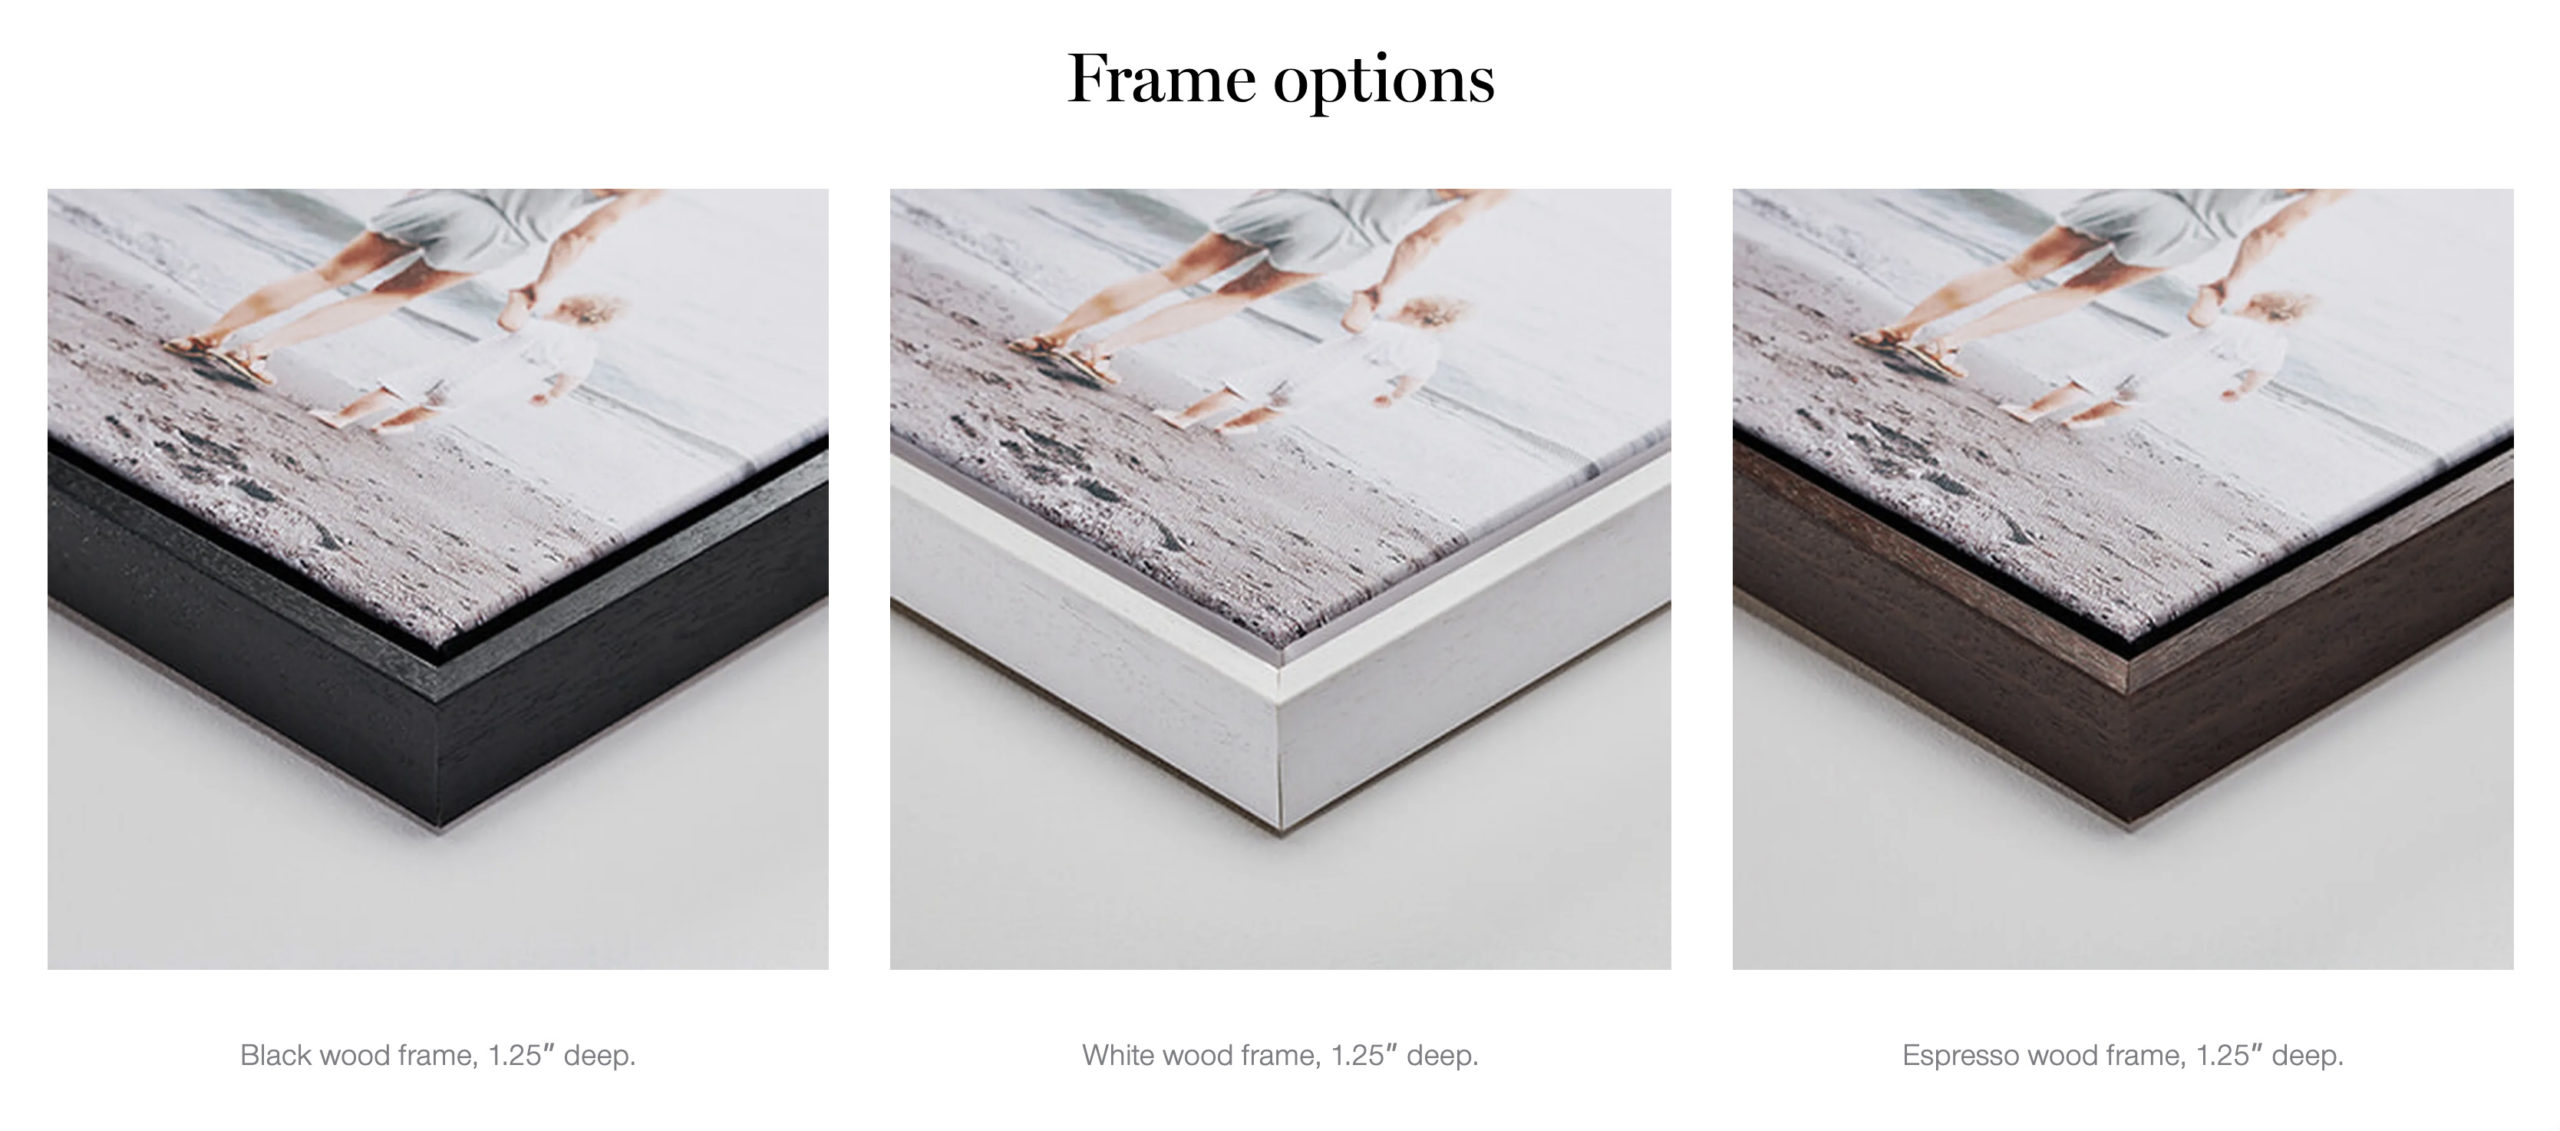 Frame Options for Wrapped Canvas Prints | How to Print and Display Your Senior Portraits | A Guide from Tacoma's Best Senior Photographer Amanda Howse